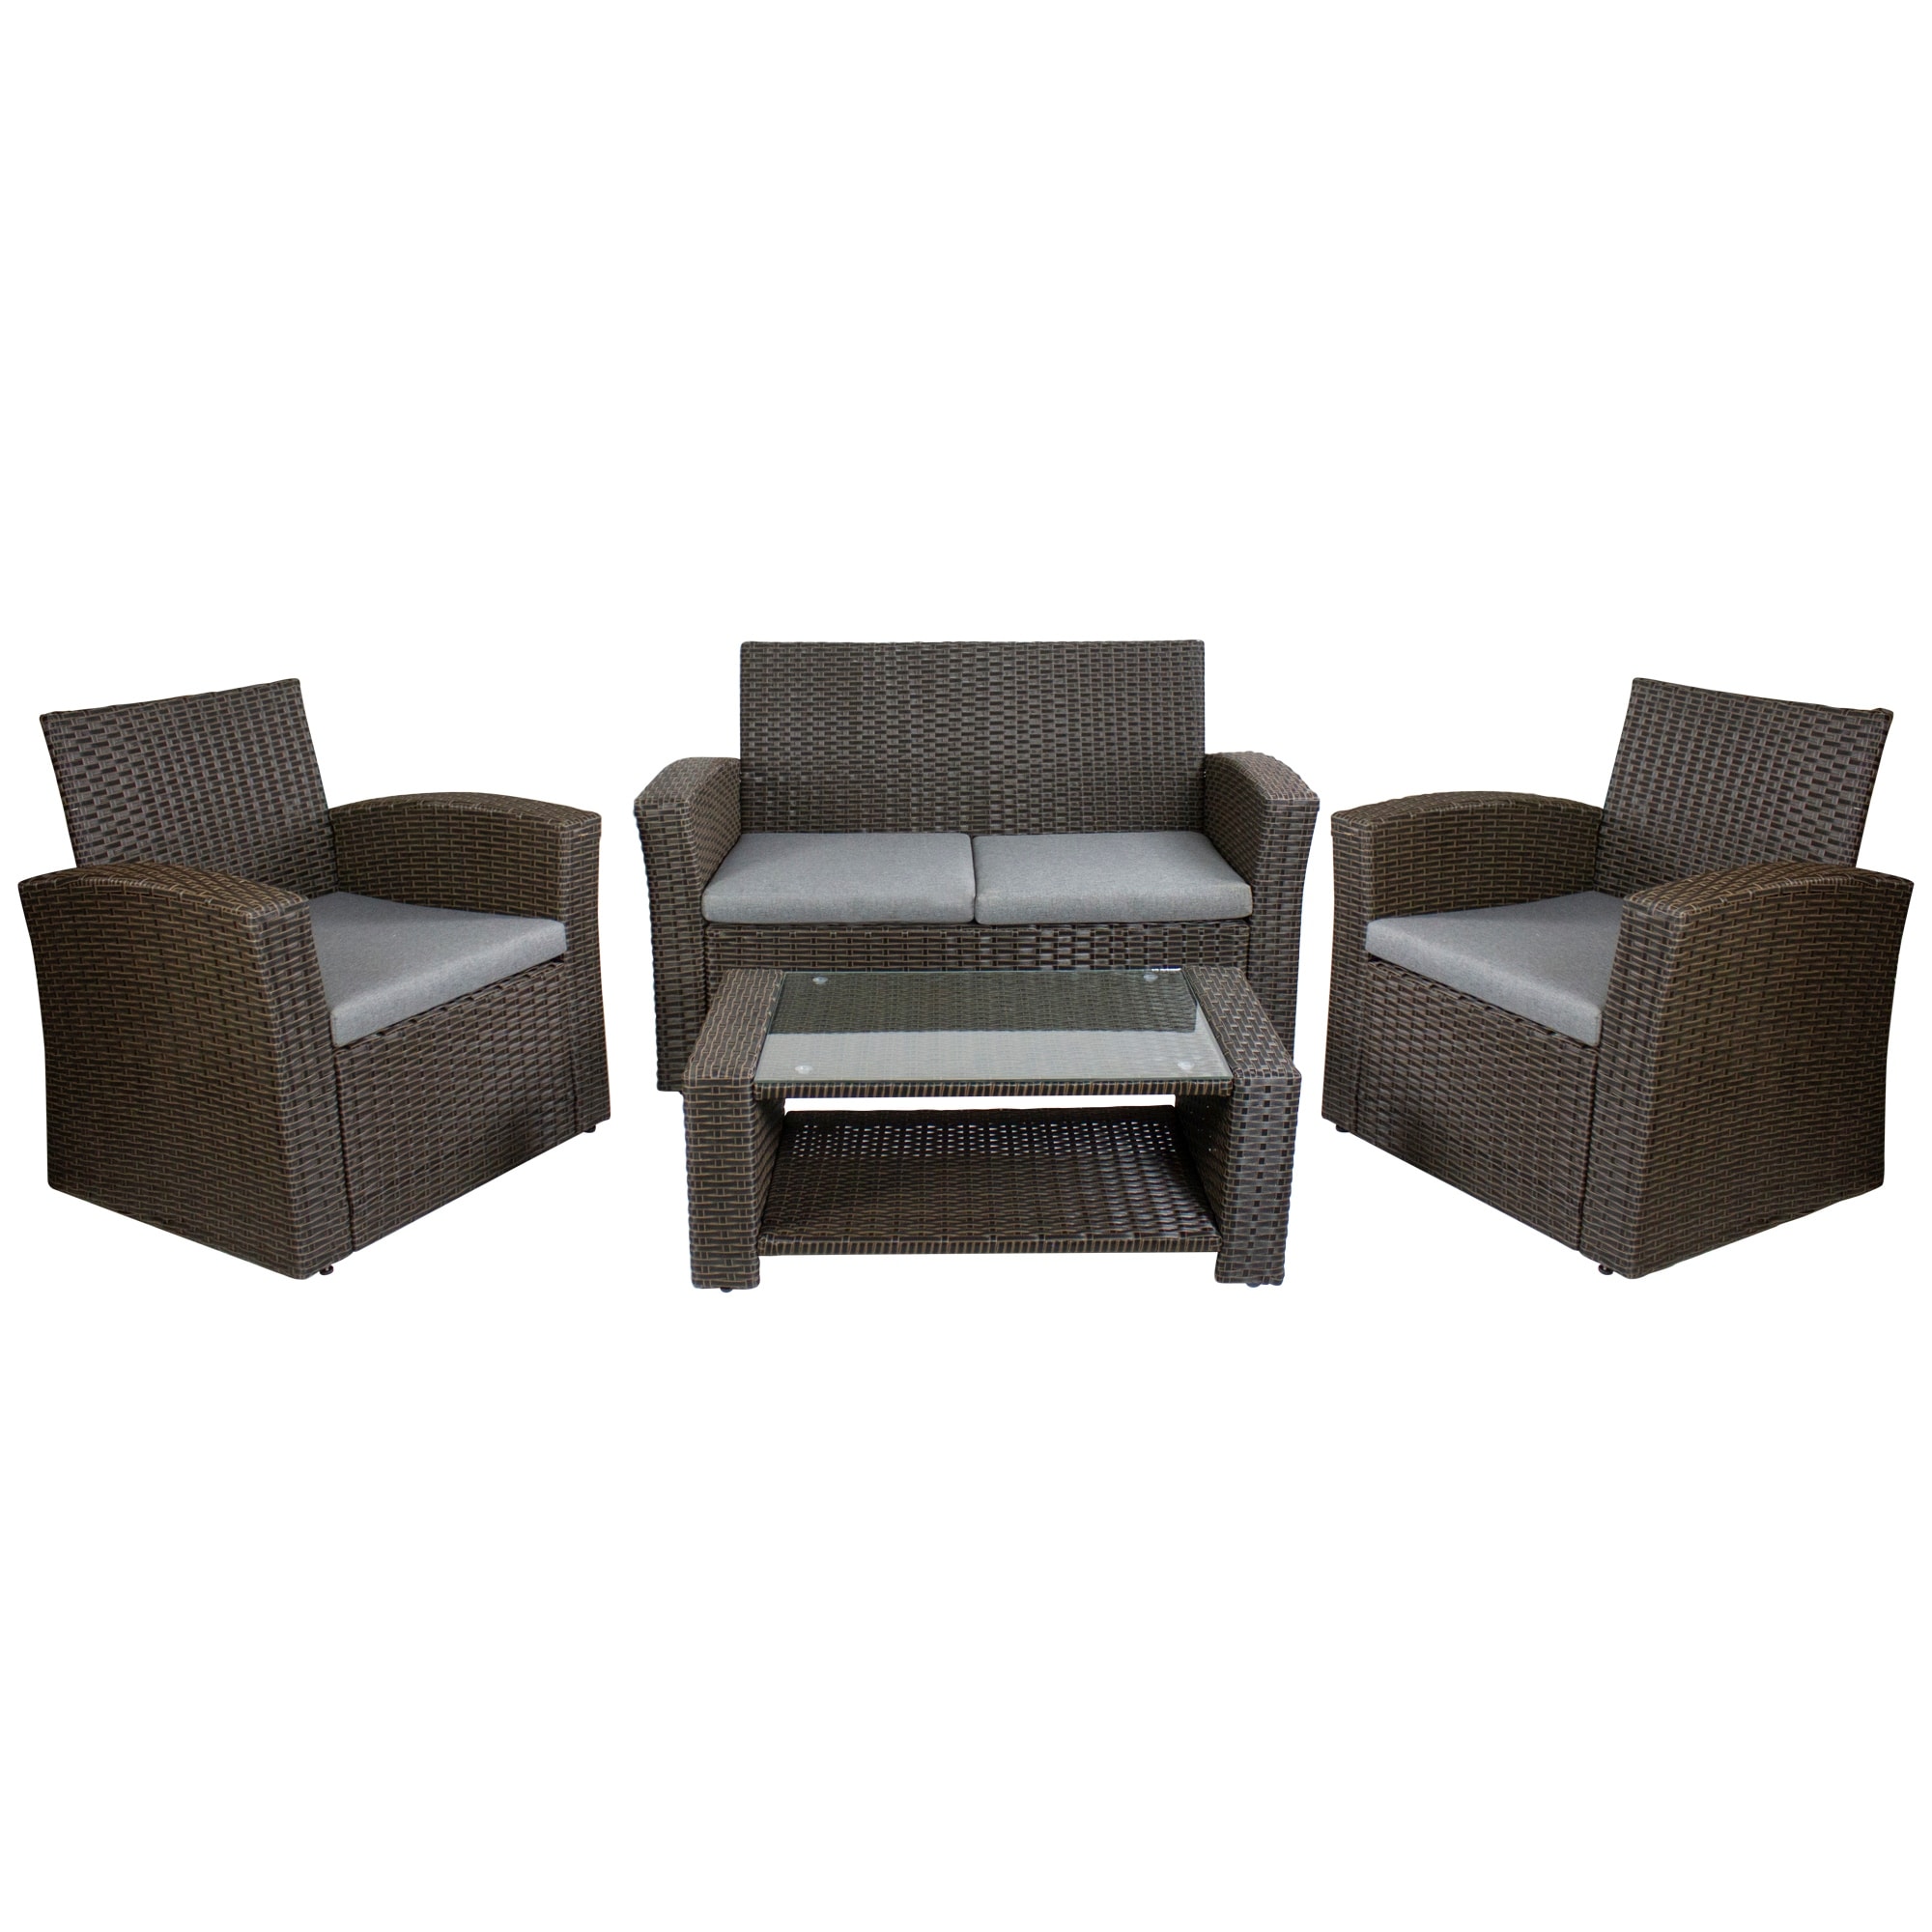 4-piece Georgetown Resin Wicker Outdoor Patio Conversation Set With Cushions - 32